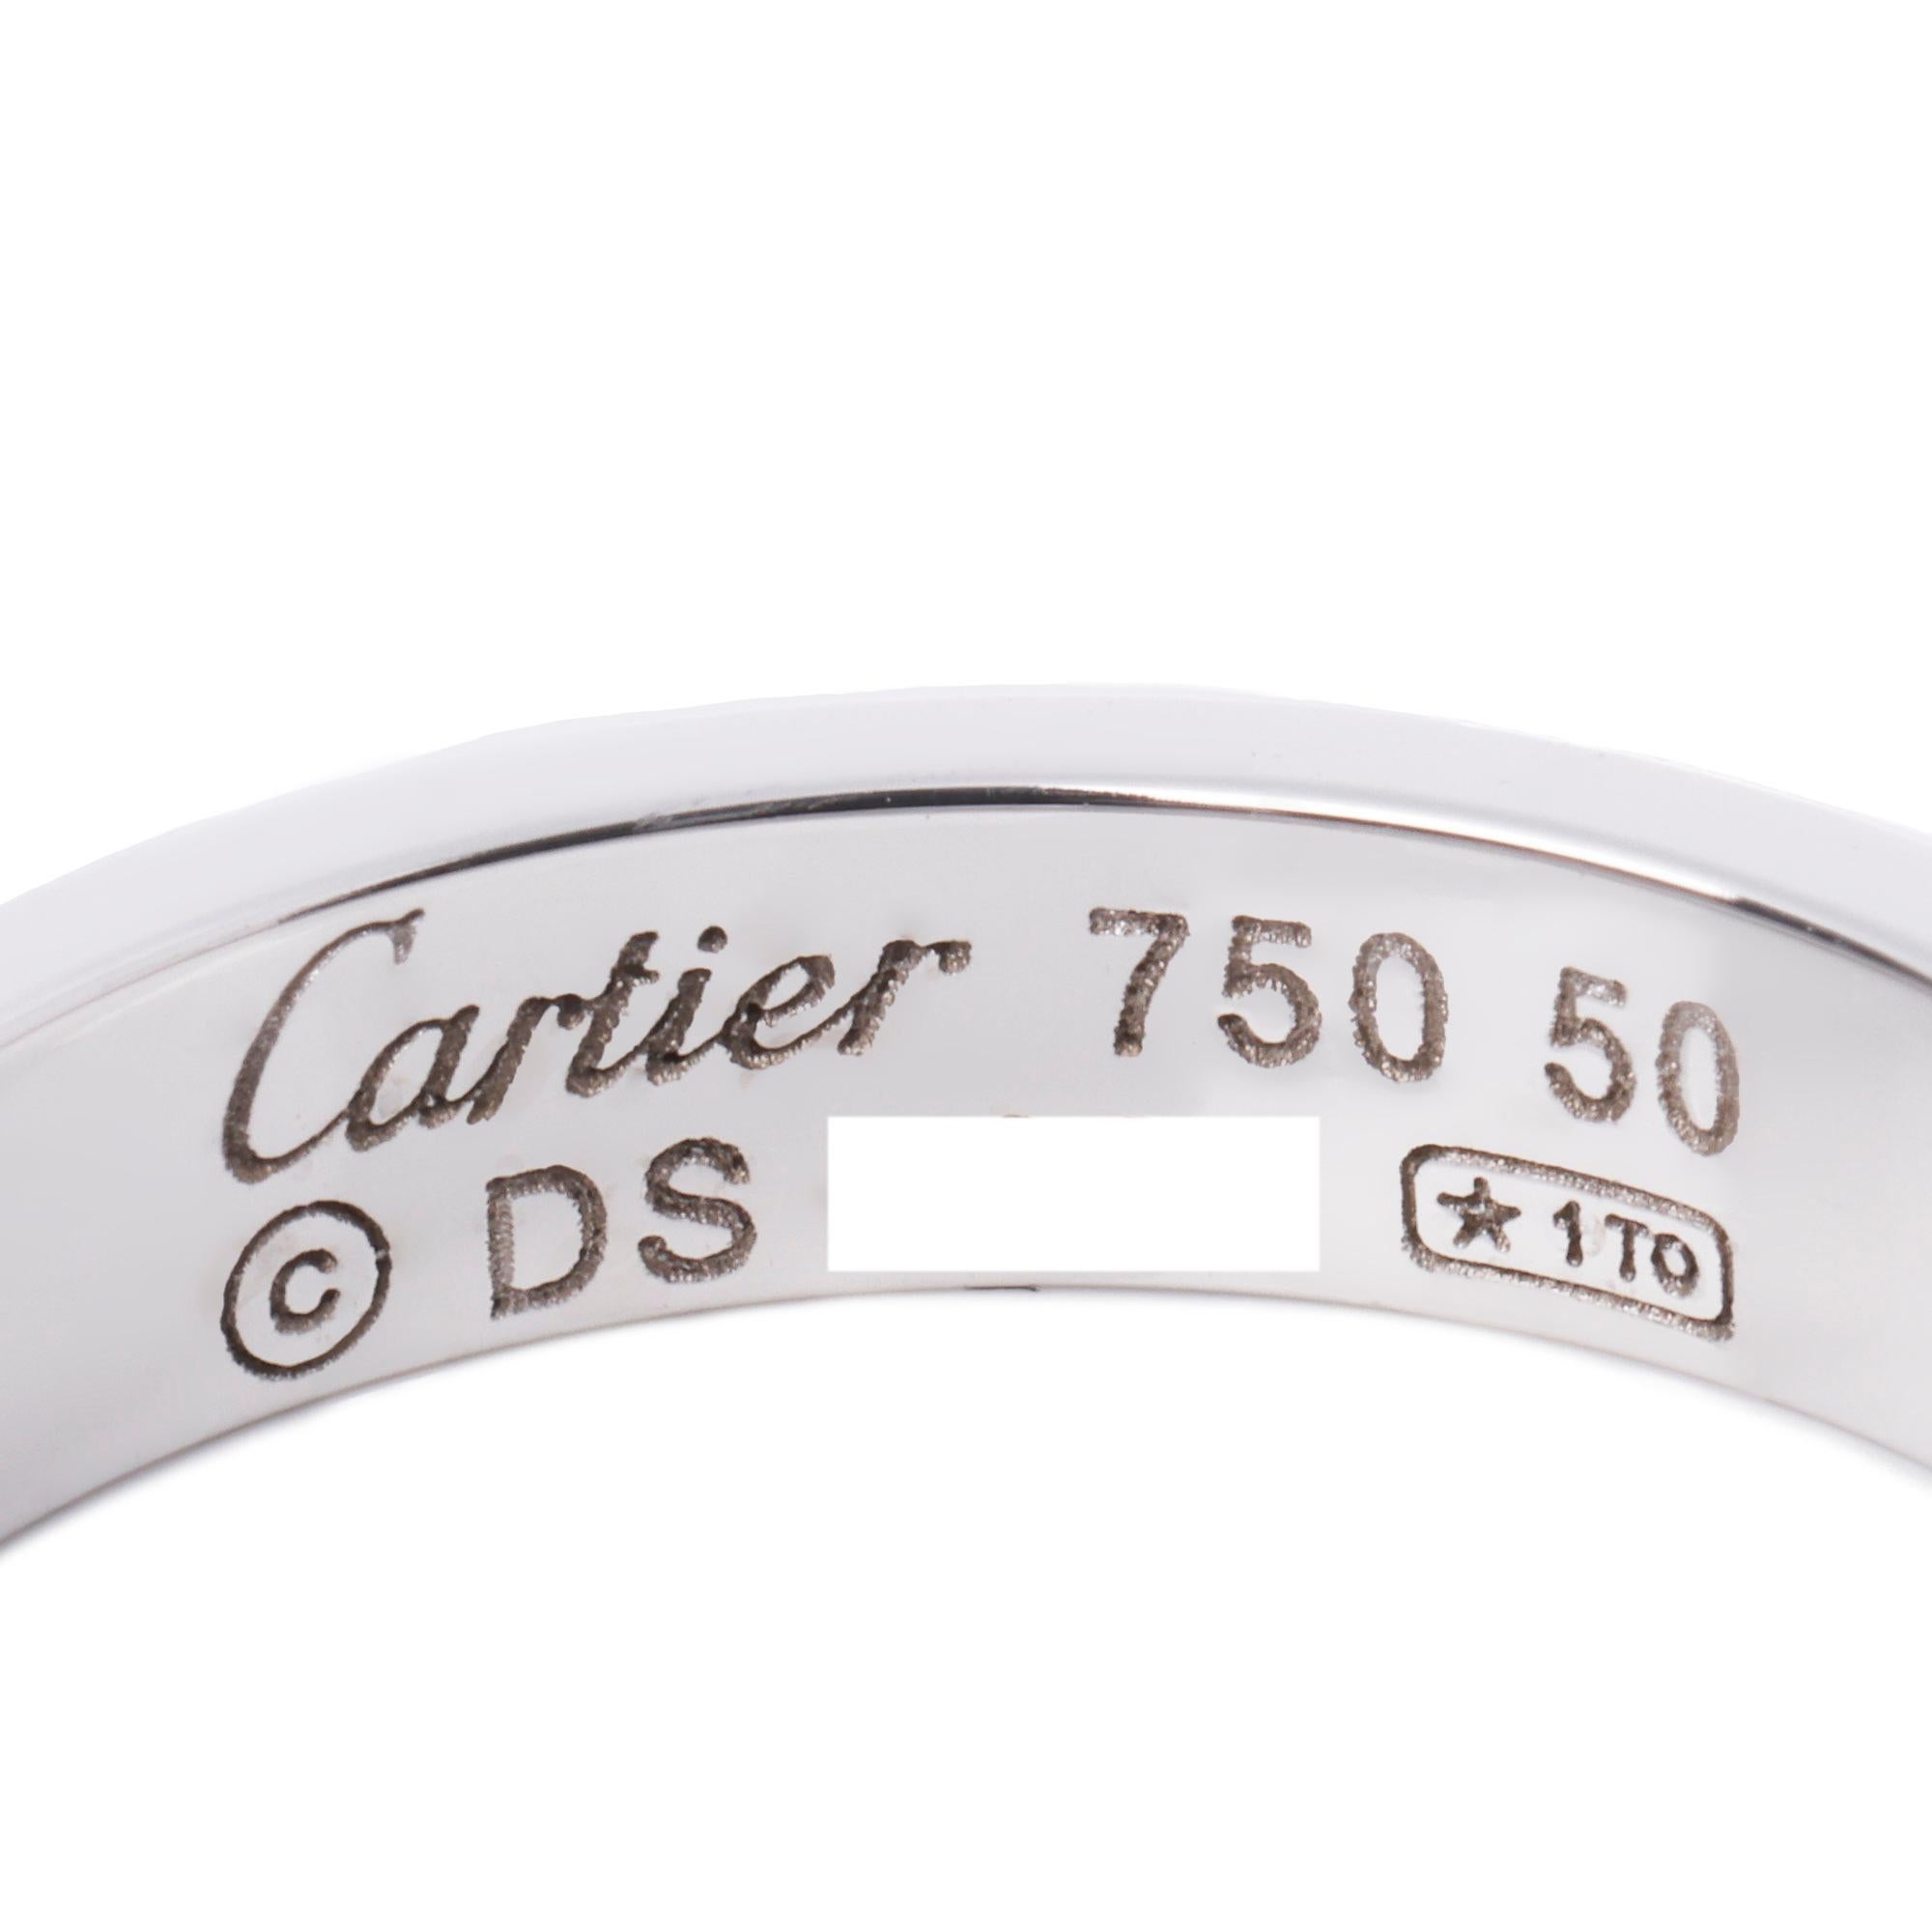 Cartier 18ct White Gold Love Wedding Band Ring

Brand- Cartier
Model- Love Wedding Band
Product Type- Ring
Material(s)- 18ct White Gold
UK Ring Size- K
EU Ring Size- 50
US Ring Size- 5 1/4
Resizing Possible- No

Band Width- 3.6mm
Total Weight-